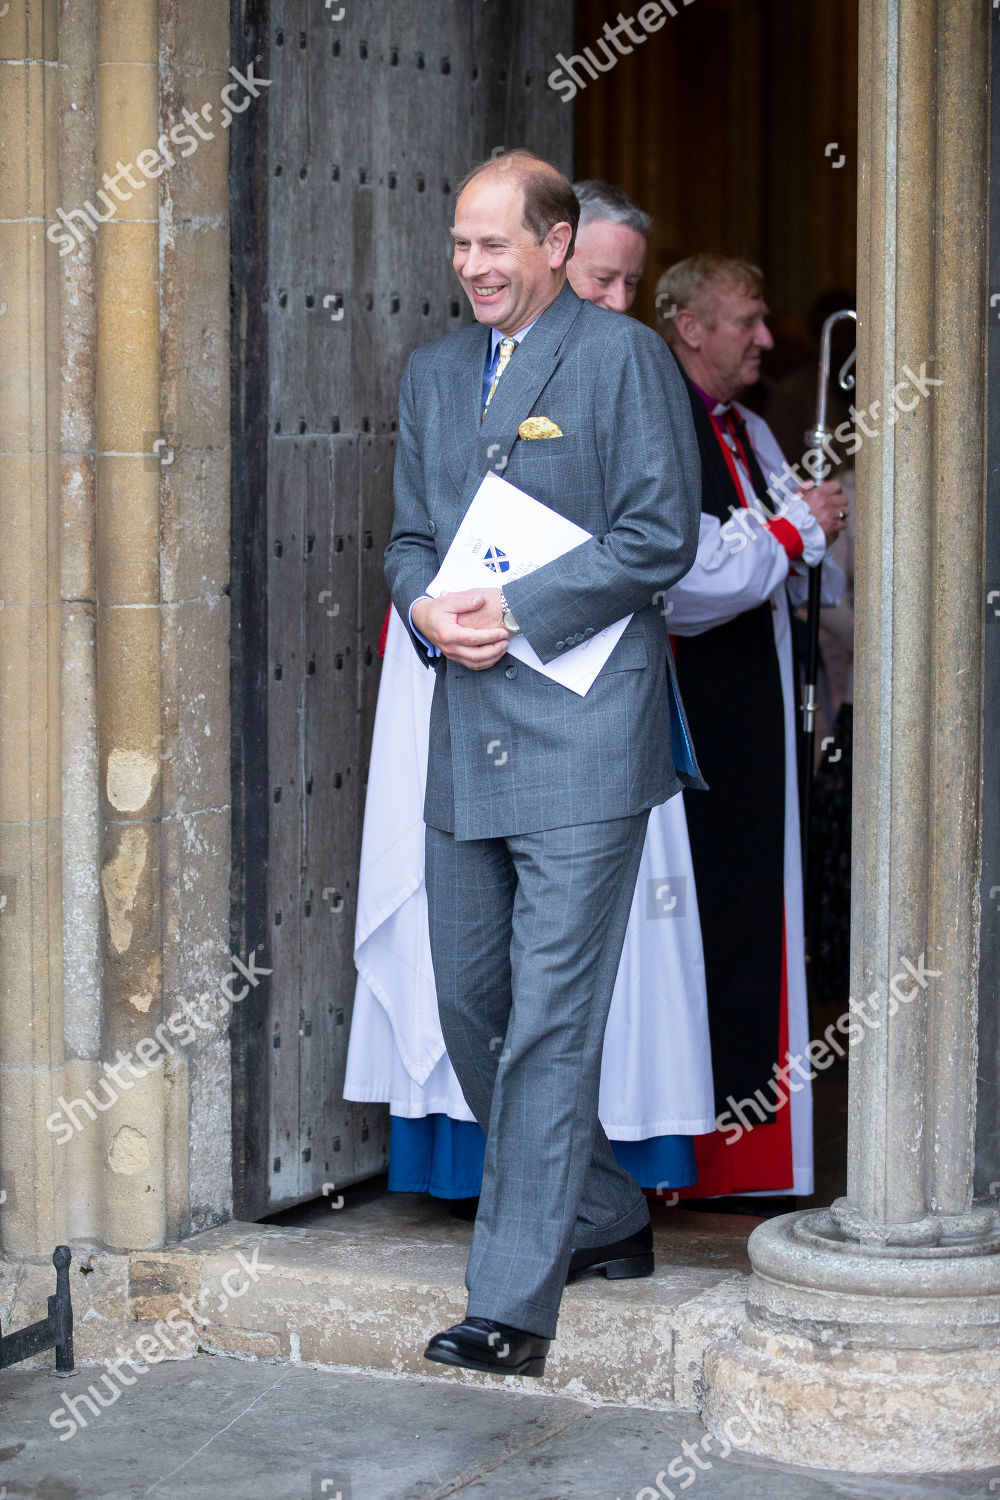 sophie-countess-of-wessex-visit-to-wells-cathedral-and-cathedral-school-somerset-uk-shutterstock-editorial-10422906v.jpg